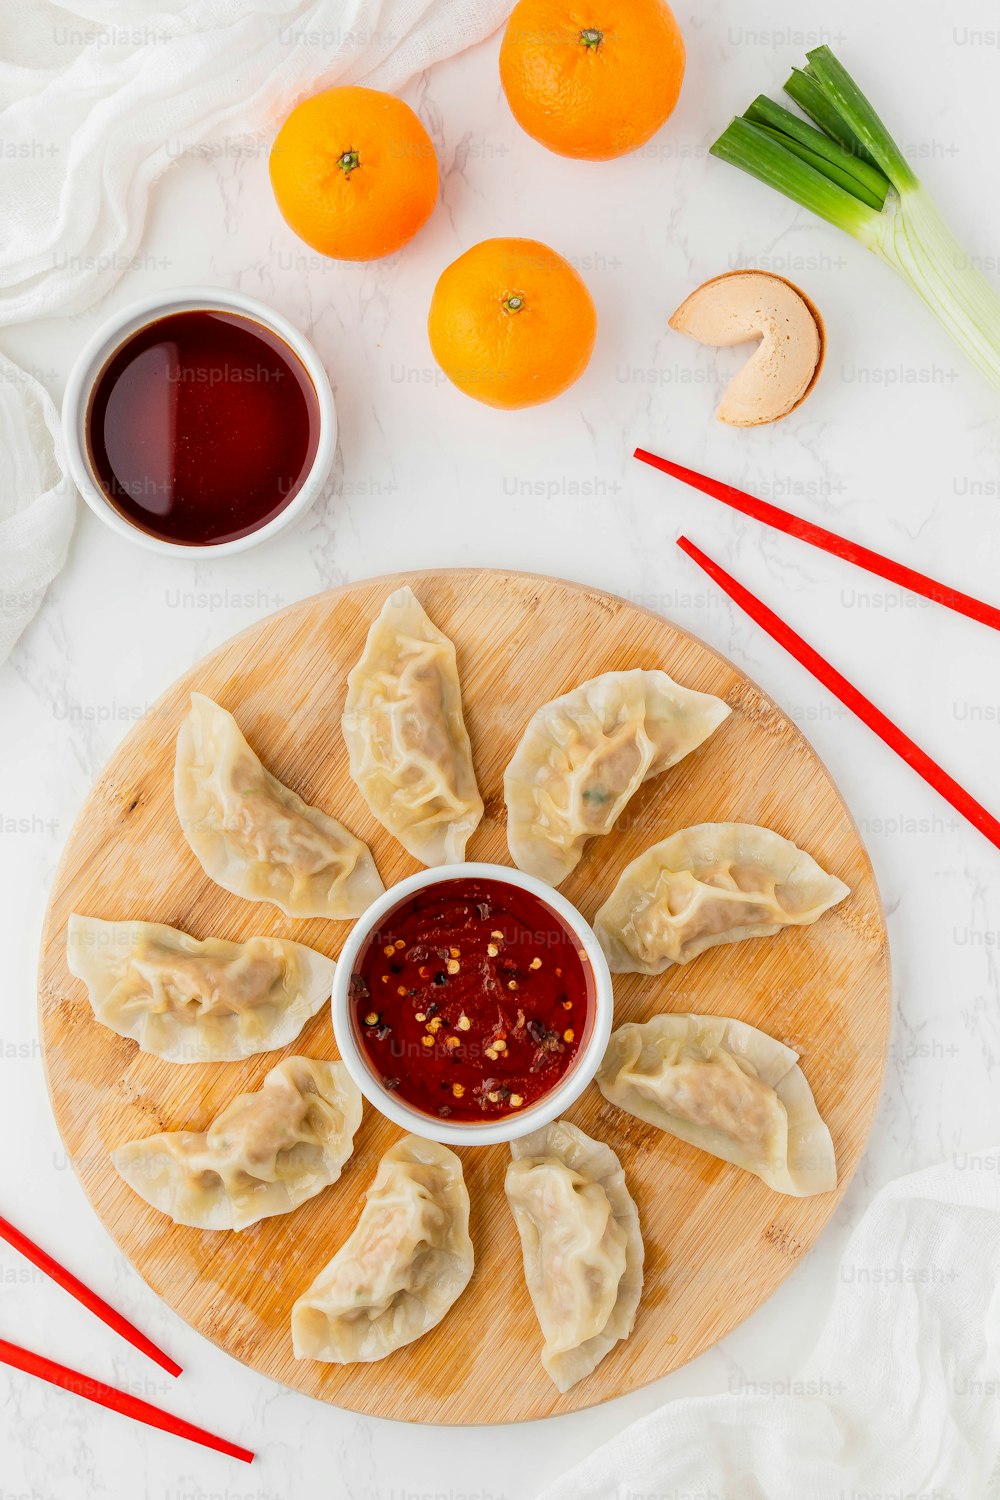 a plate of dumplings with dipping sauce next to oranges and chopsticks